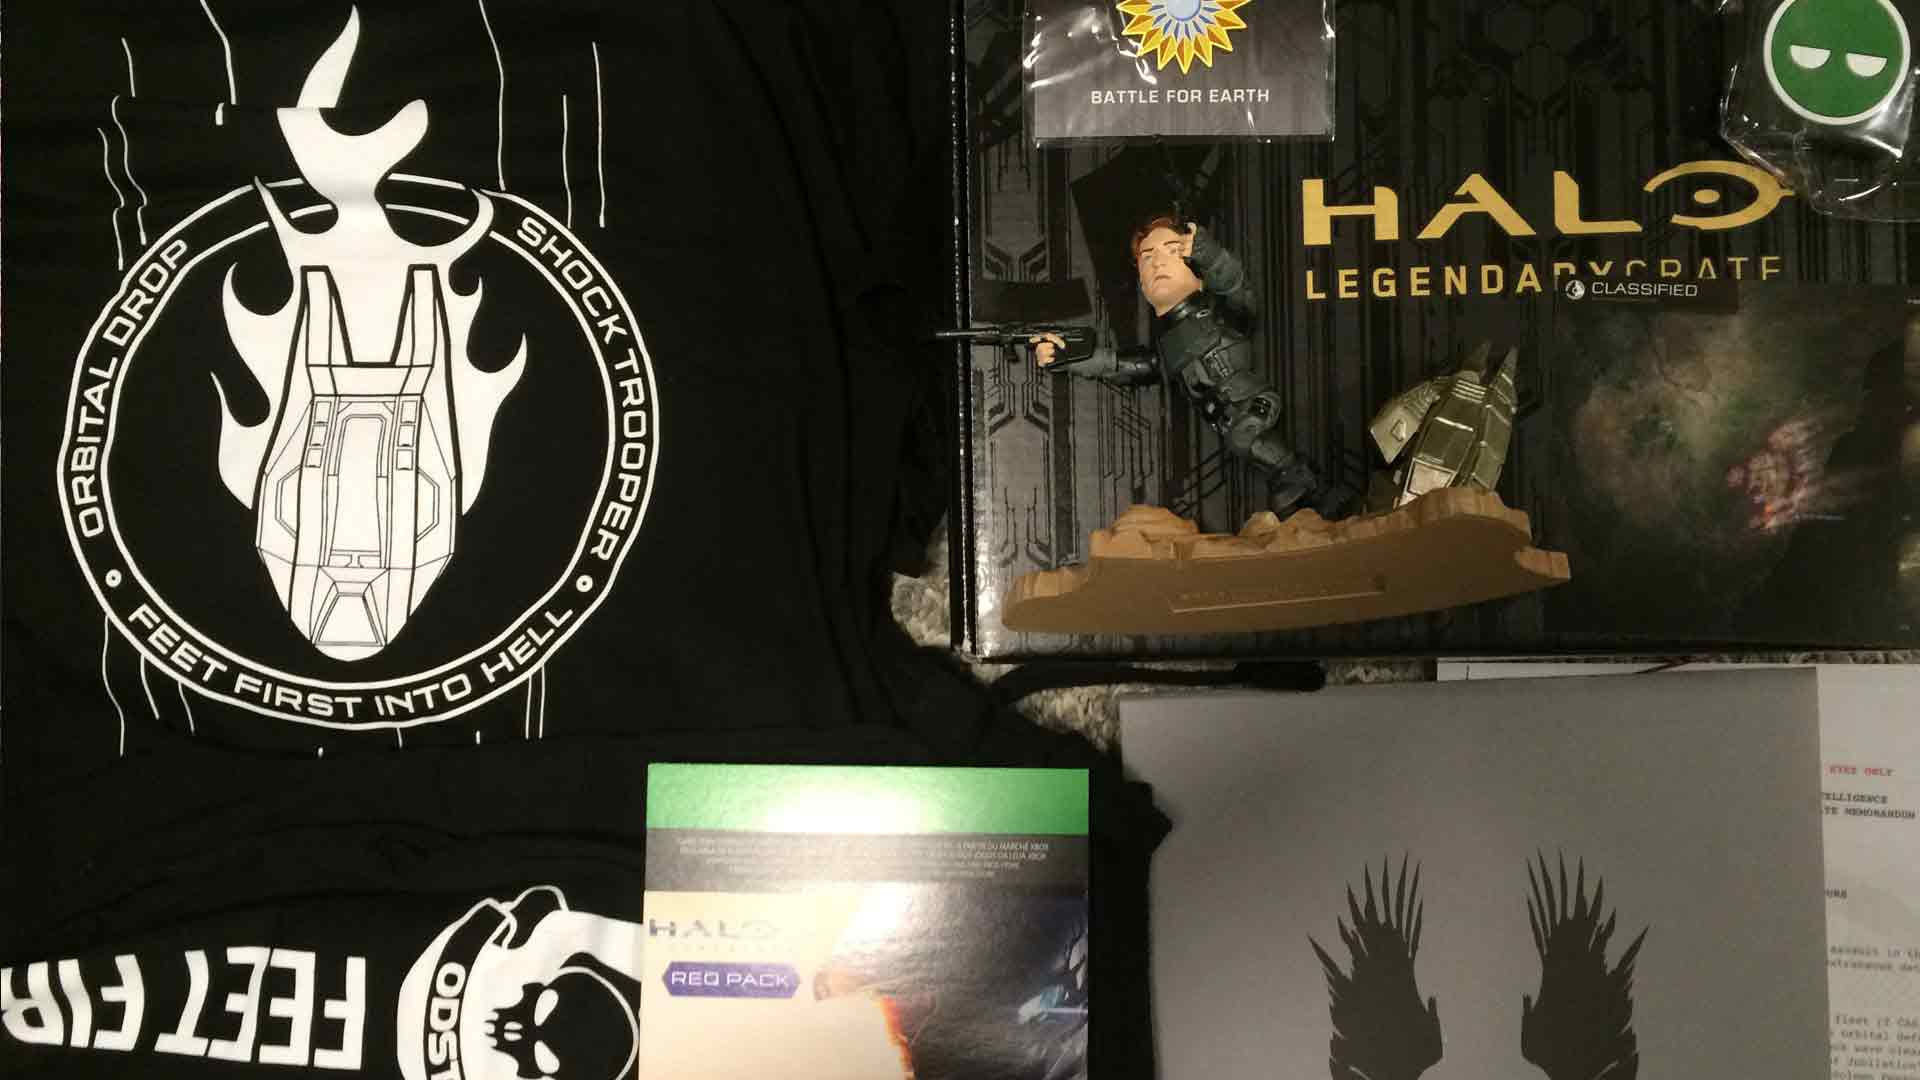 Halo Legendary Loot Crate: ODST Unboxing Review